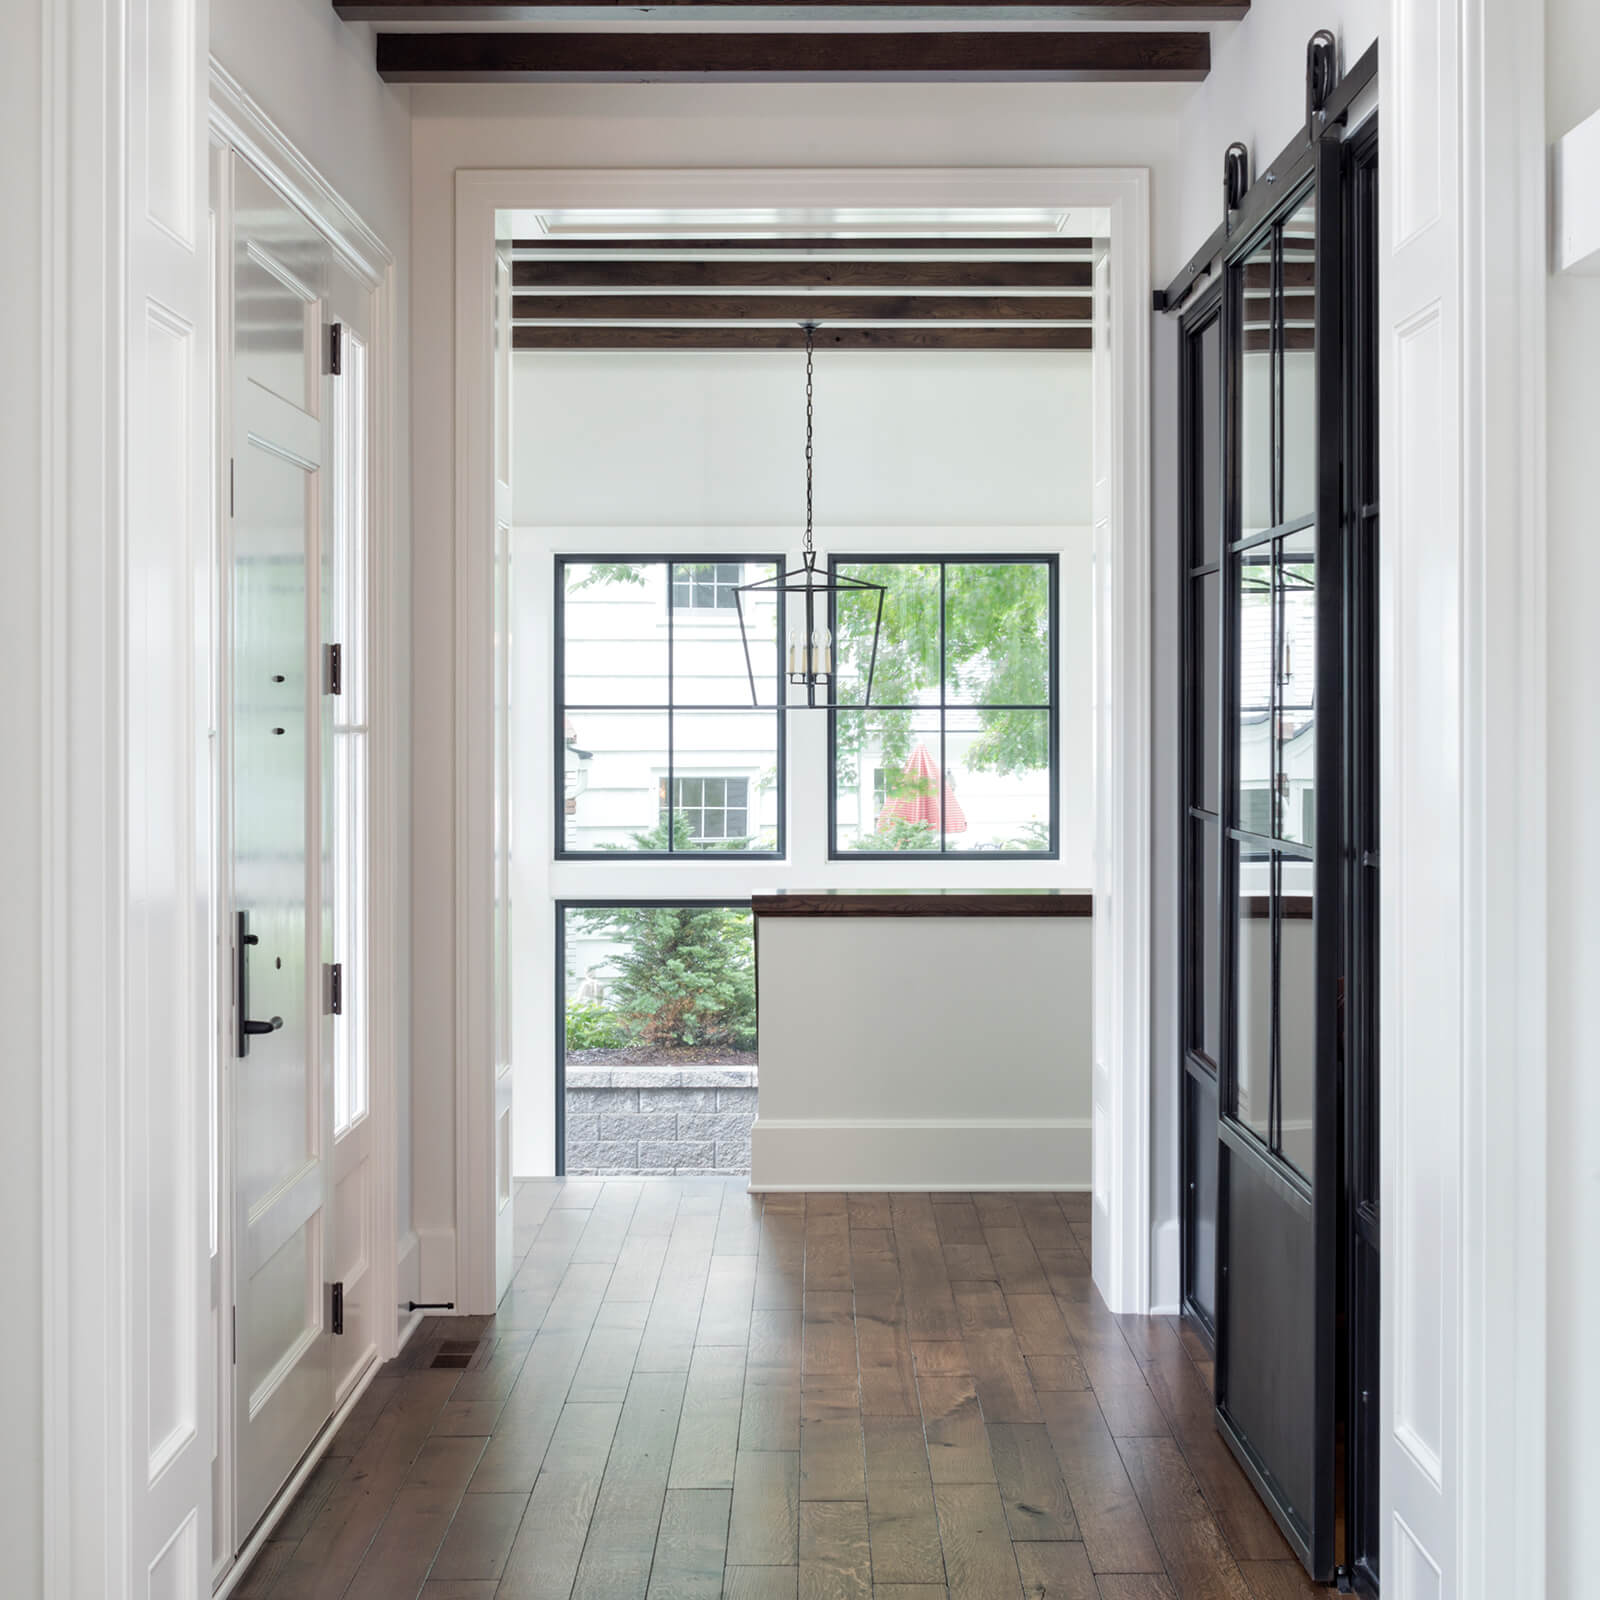 Interior hallway looking out to Marvin Signature Ultimate Casement Windows and Ultimate Picture Windows